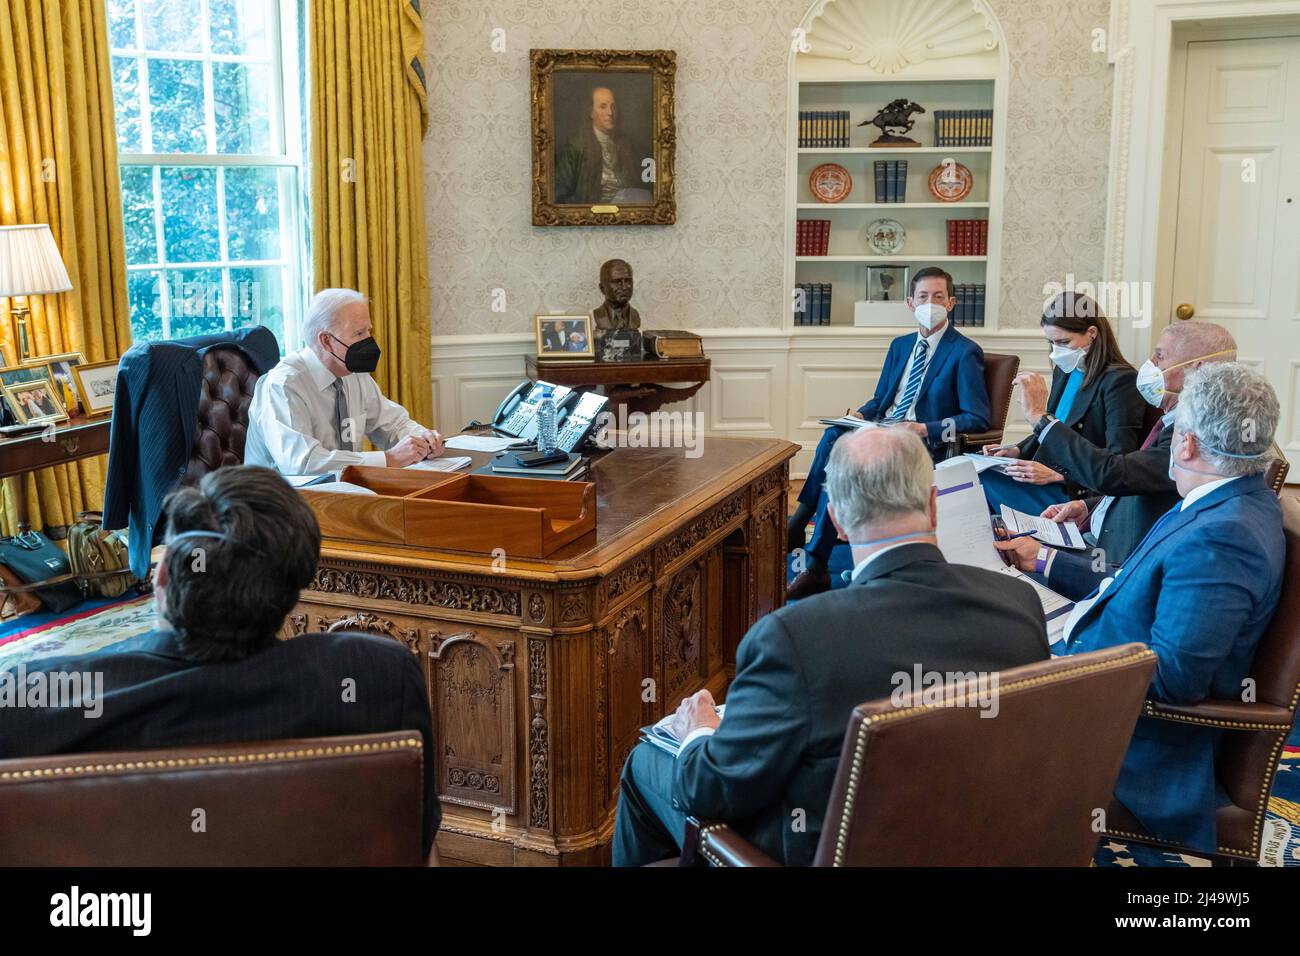 President Joe Biden meets with members of the COVID-19 Task Force, Wednesday, February 16, 2022, in the Oval Office.  Official White House Photo by Adam Schultz) Stock Photo